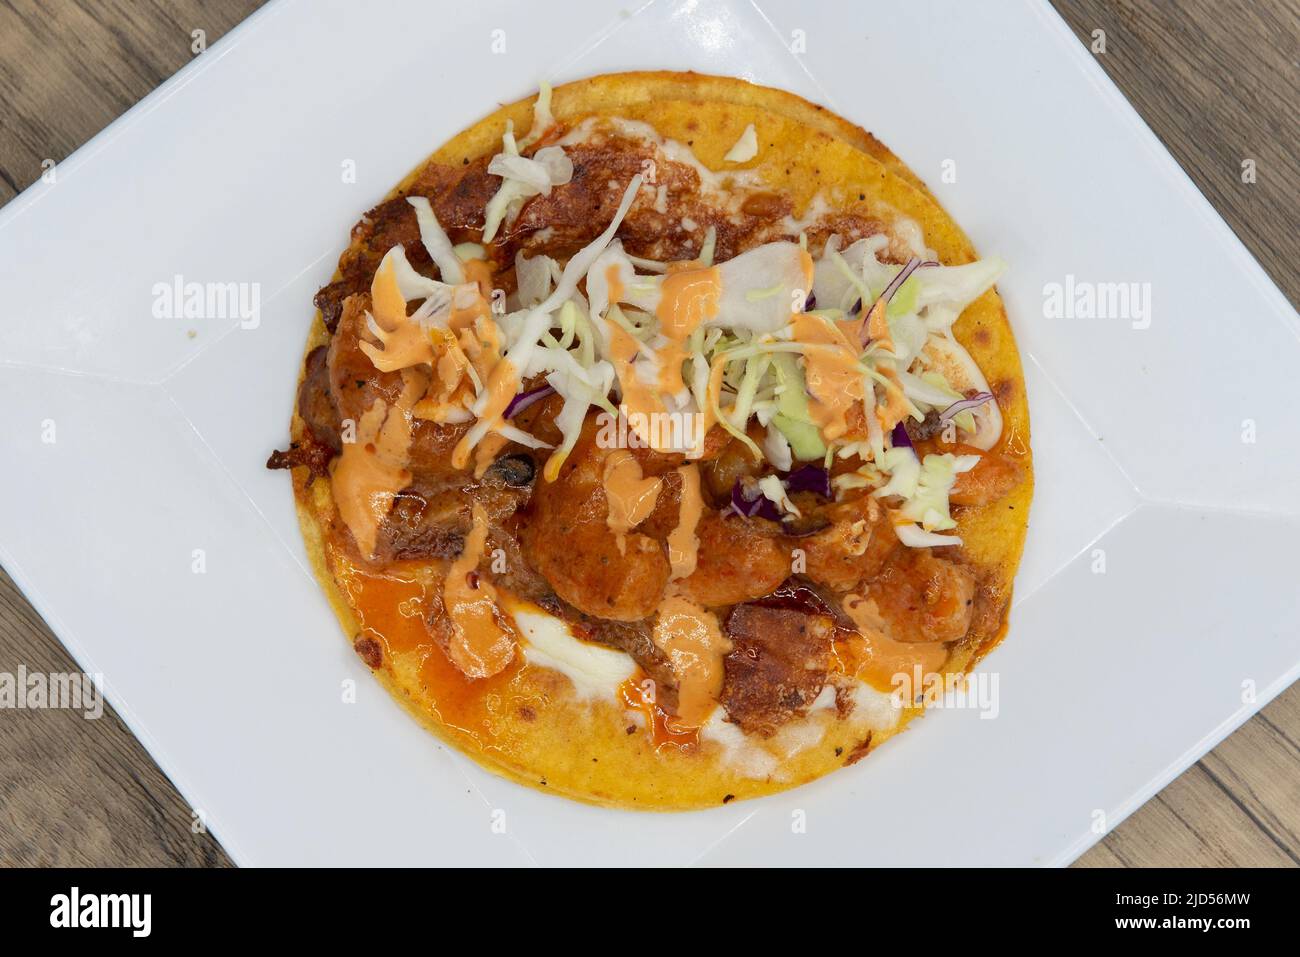 Overhead view of appetizing shrimp taco with all the great toppings for a tempting Mexican food delicacy. Stock Photo